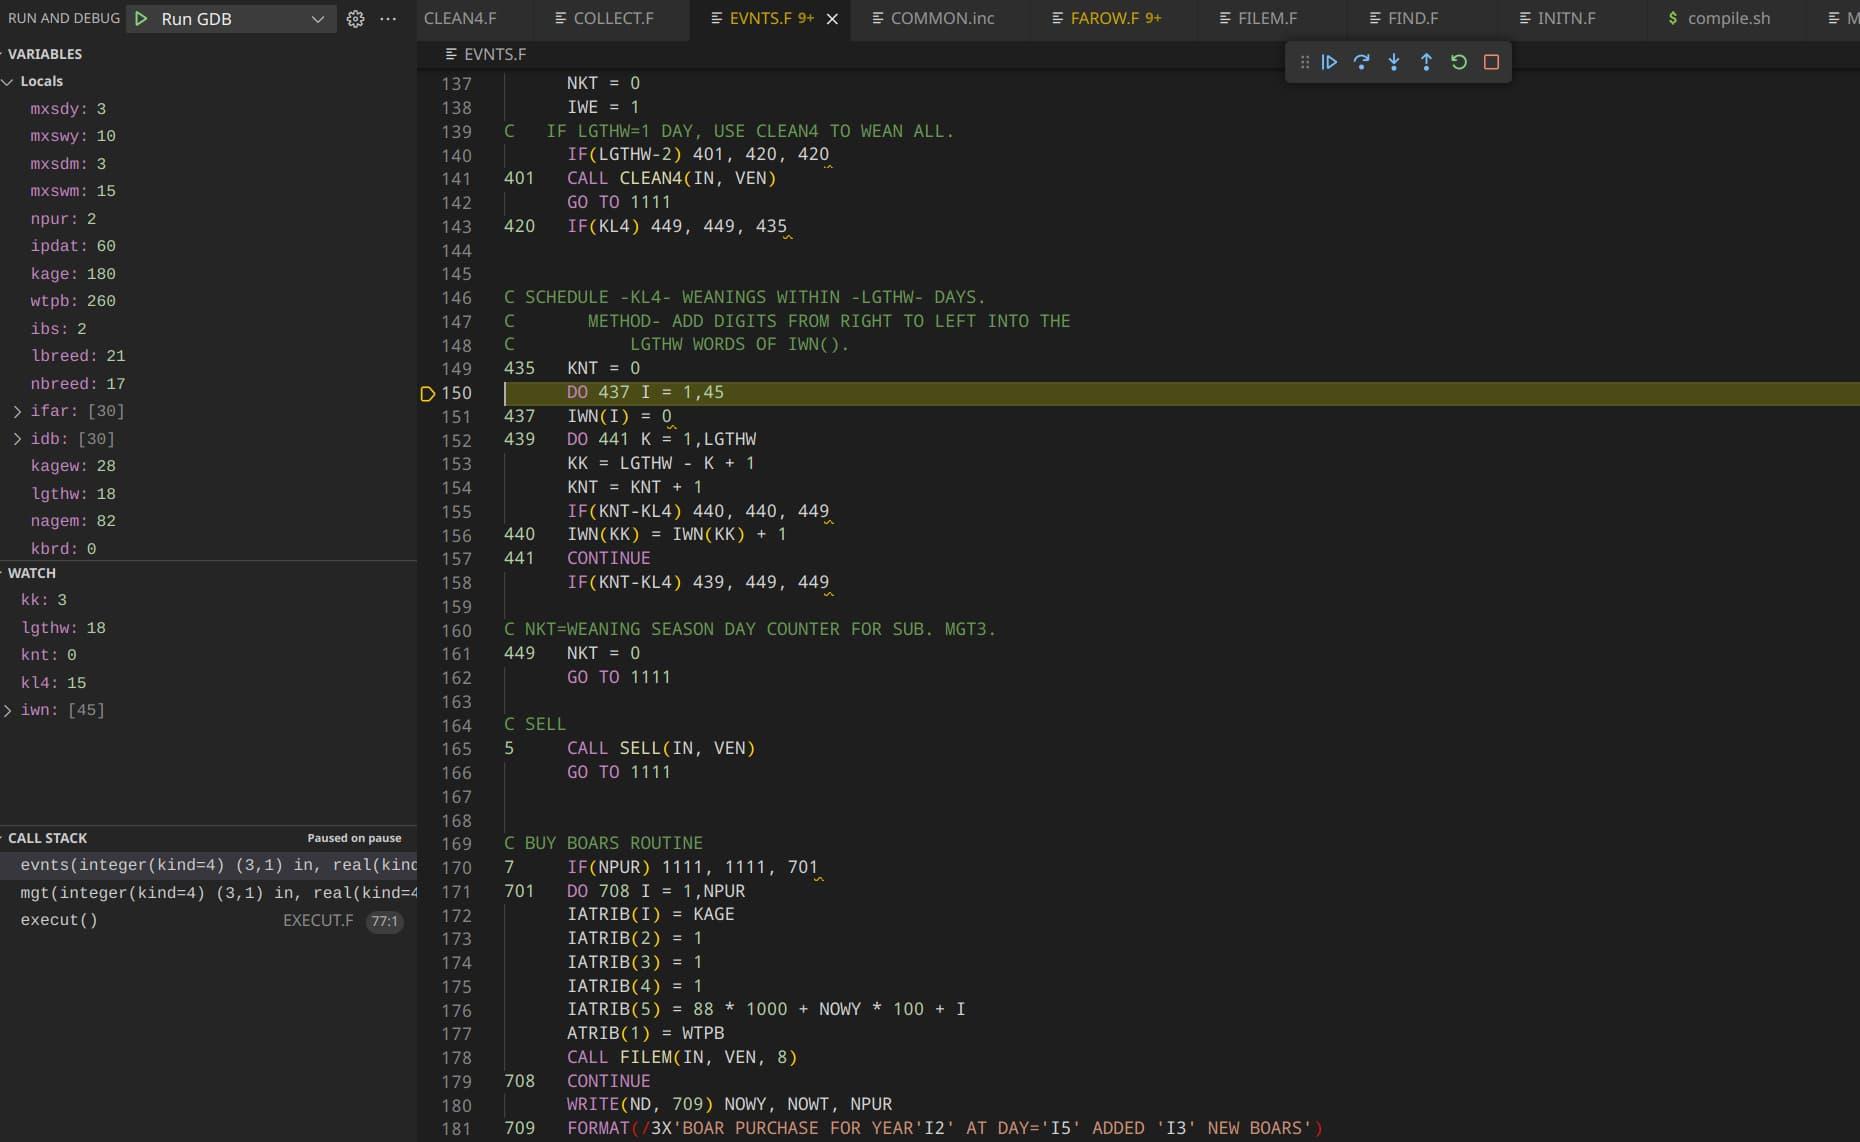 A VS code editor screenshot, showing a highlighted line of code, pause, play, forward, and stop buttons, and a list of variables with their values